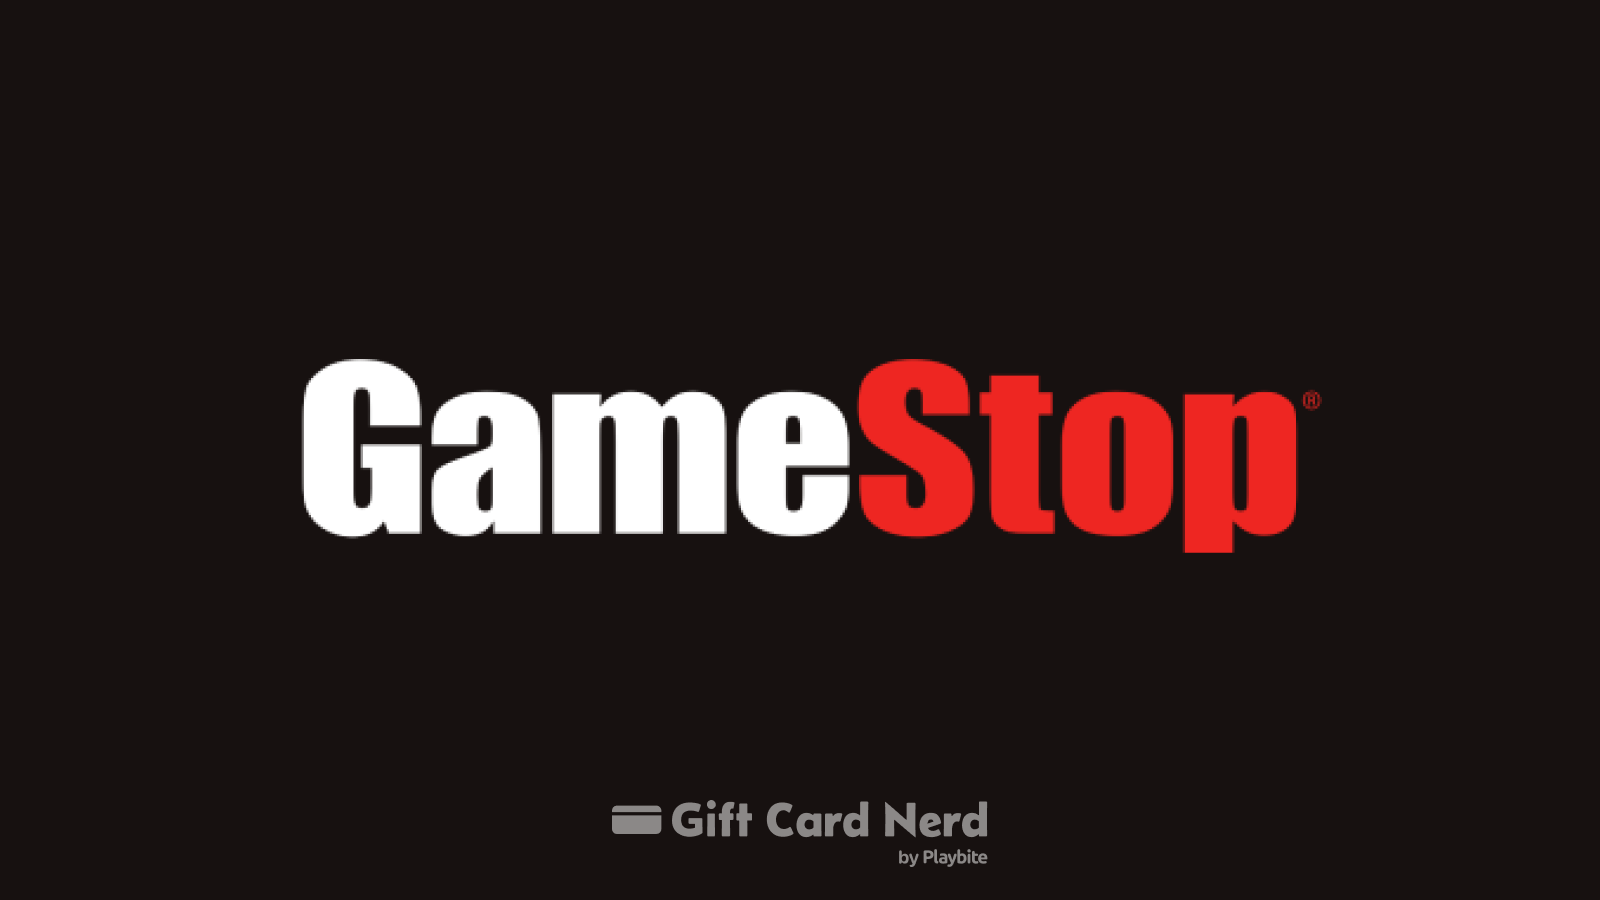 Does Walmart Sell GameStop Gift Cards?